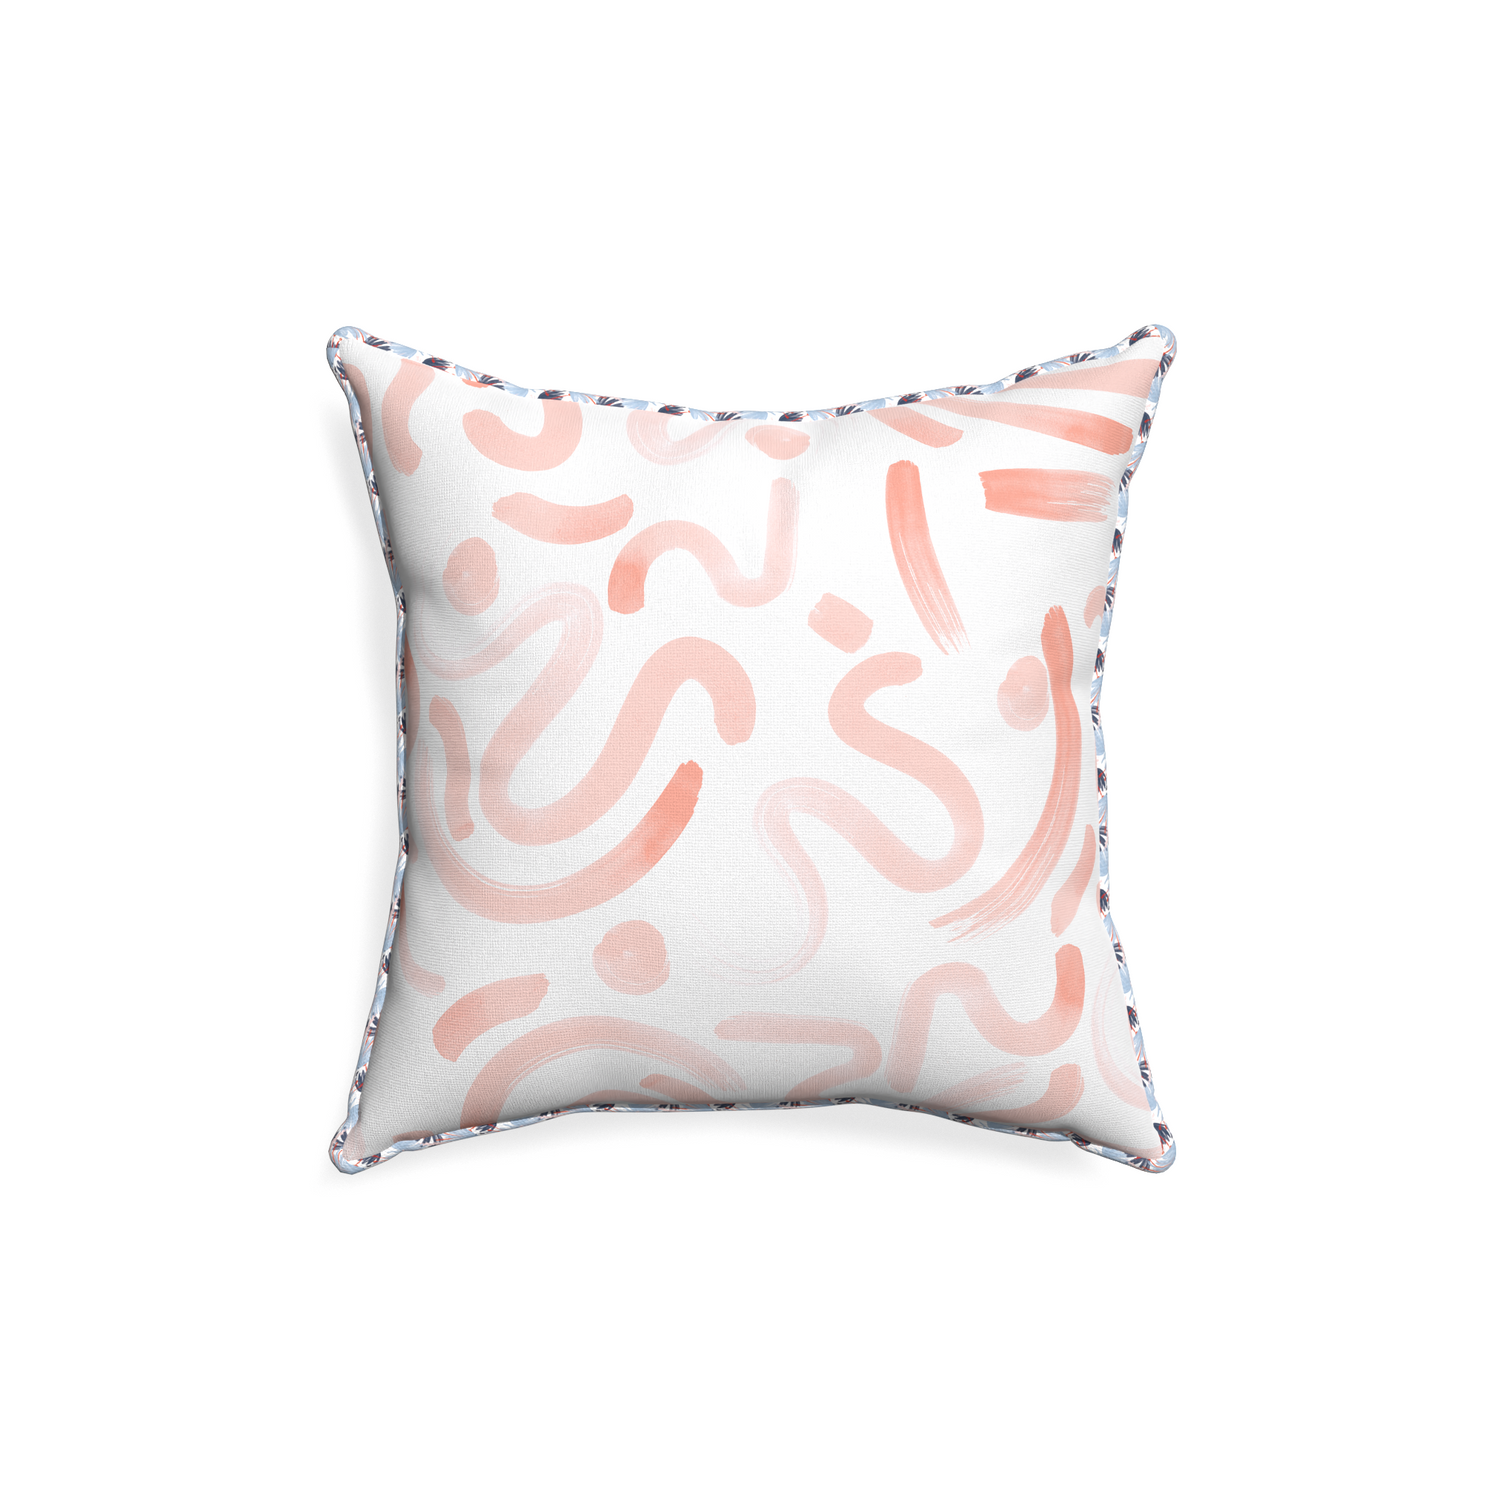 18-square hockney pink custom pink graphicpillow with e piping on white background